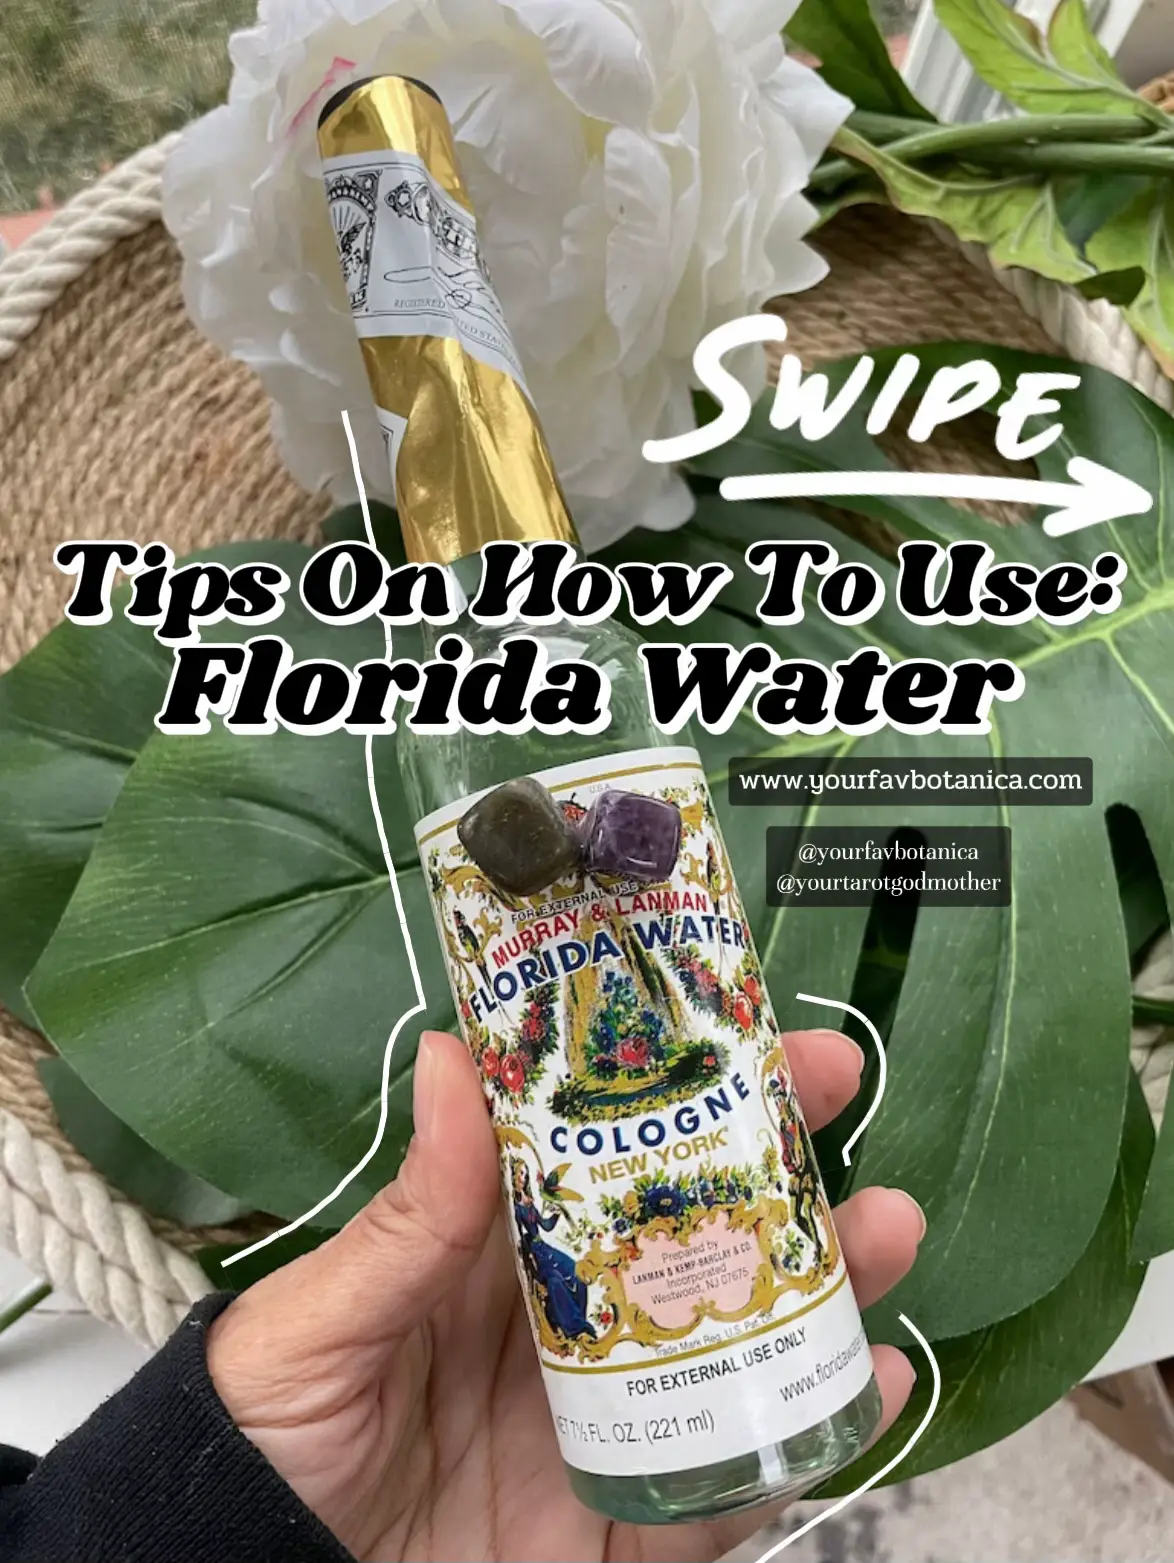 Florida Water for Enhancing Intuition - Lemon8 Search